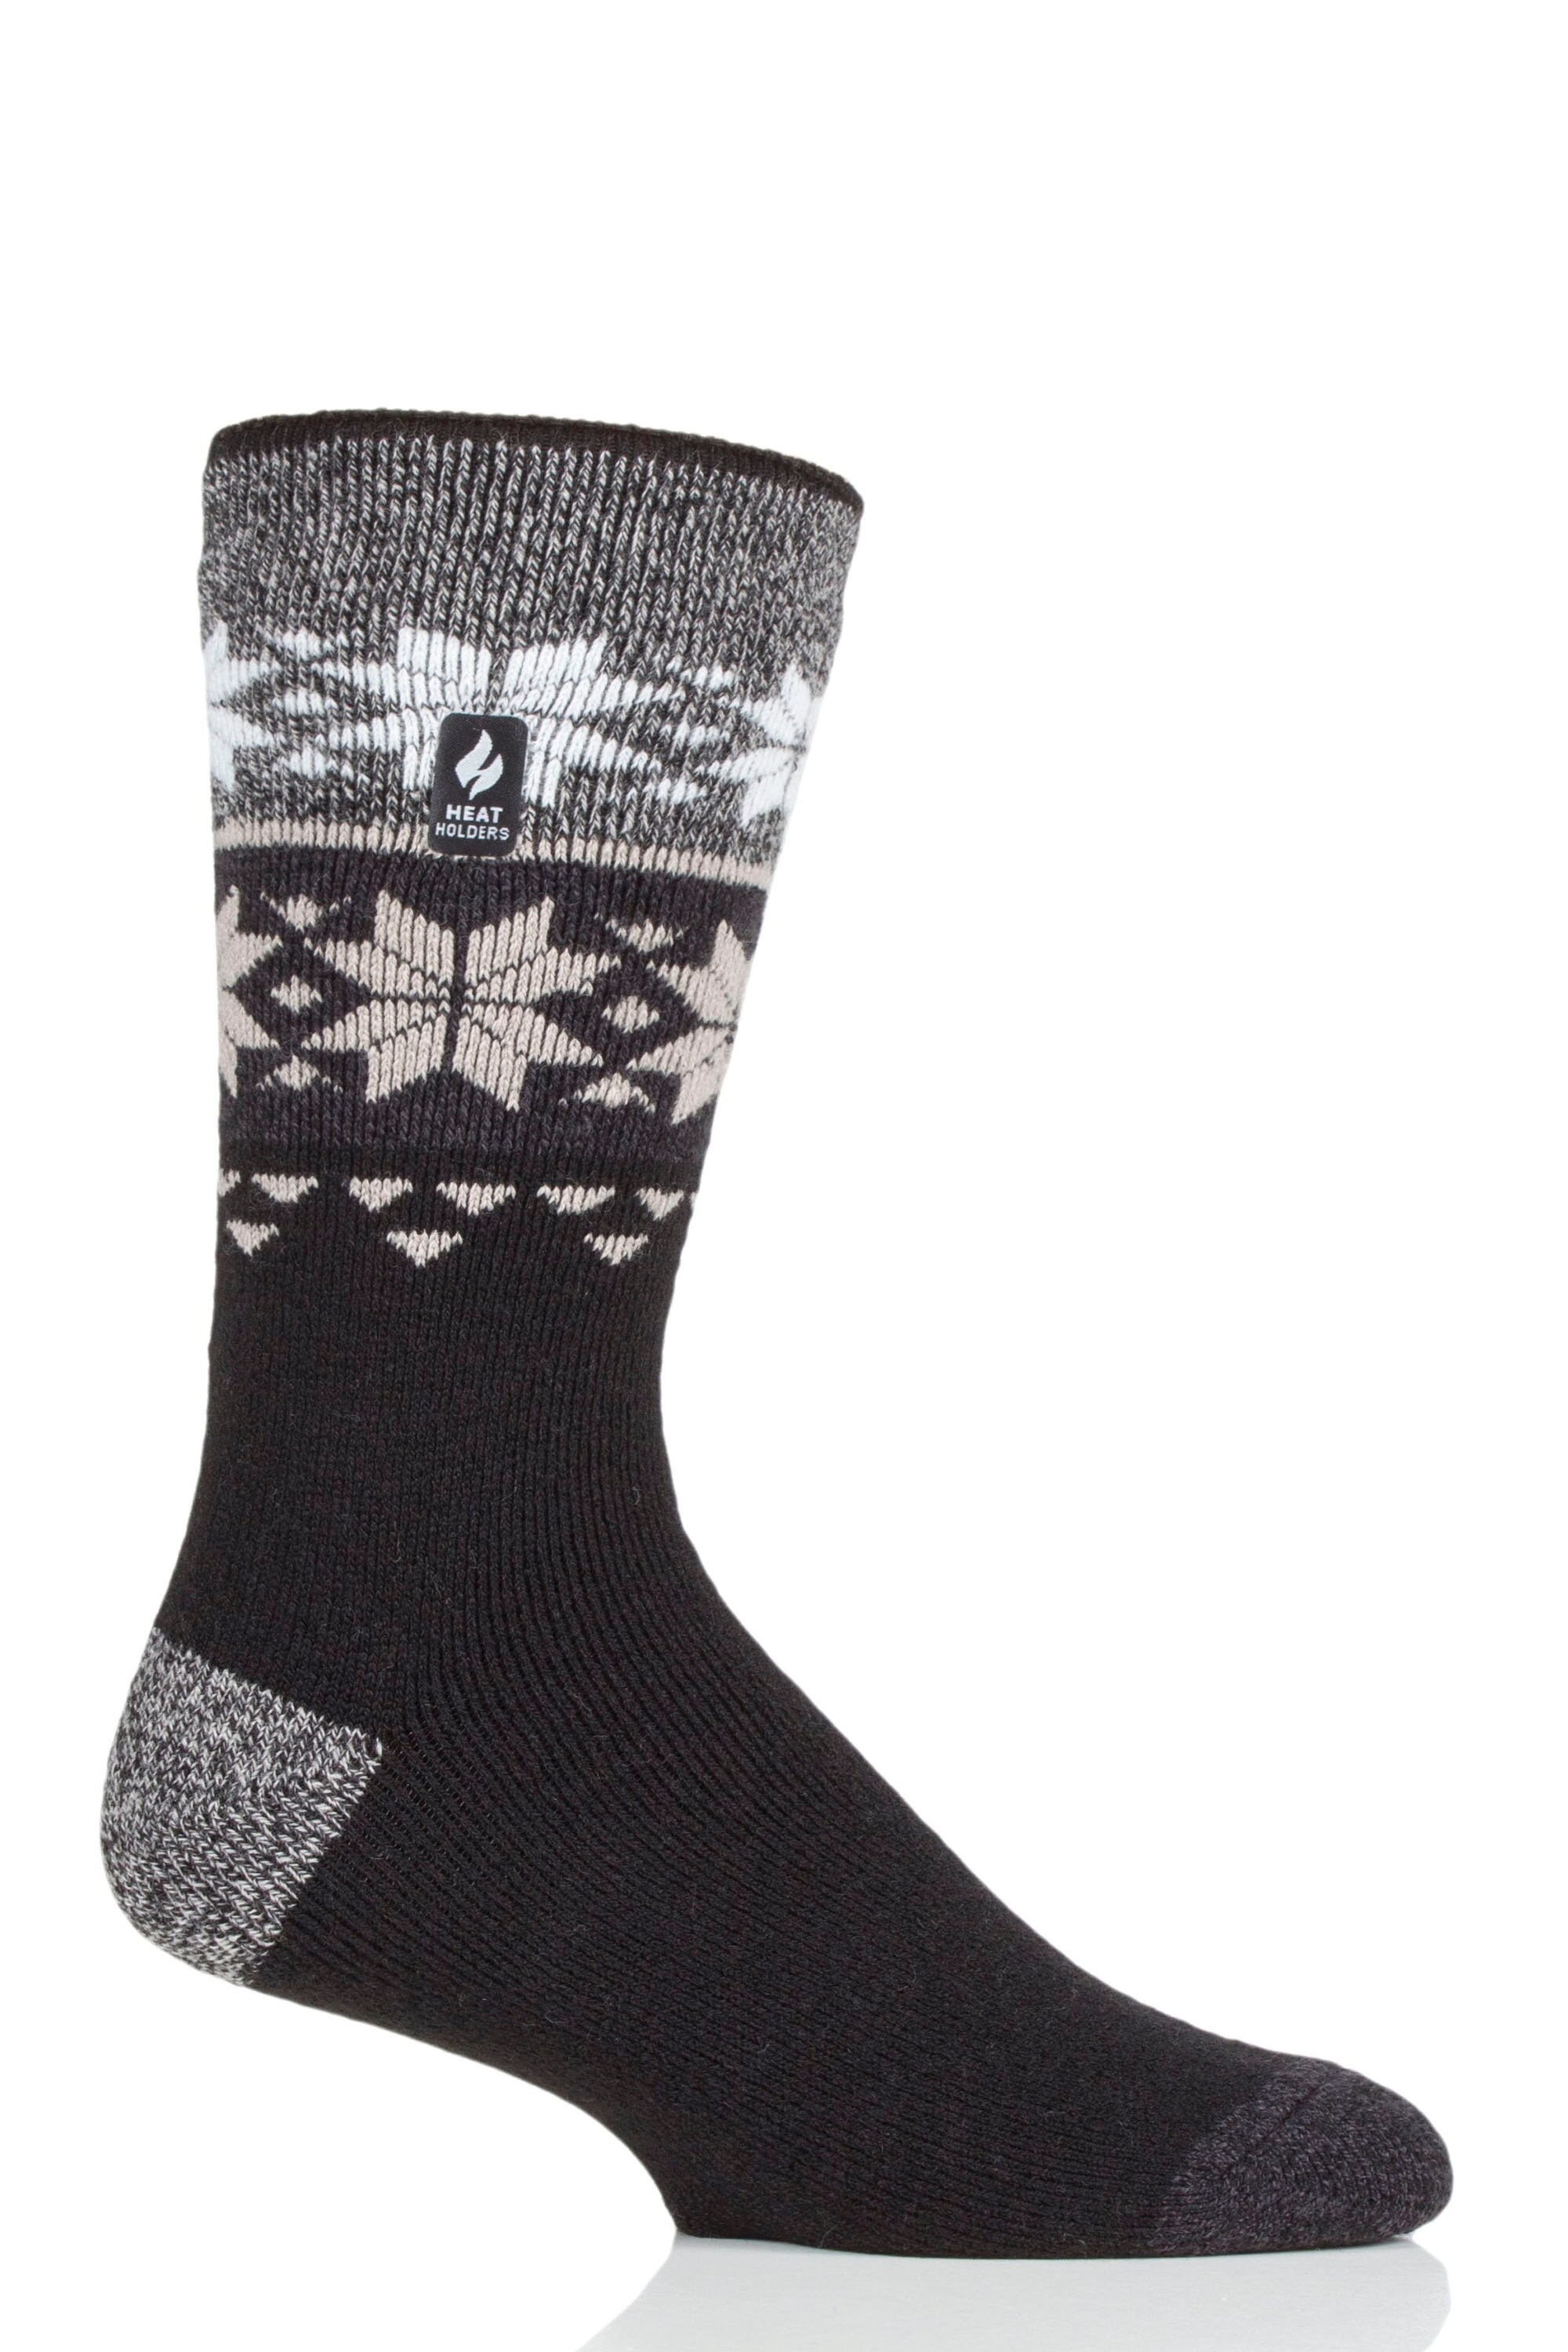 Heat Holders Men's Acrylic Crew Socks in the Socks department at Lowes.com